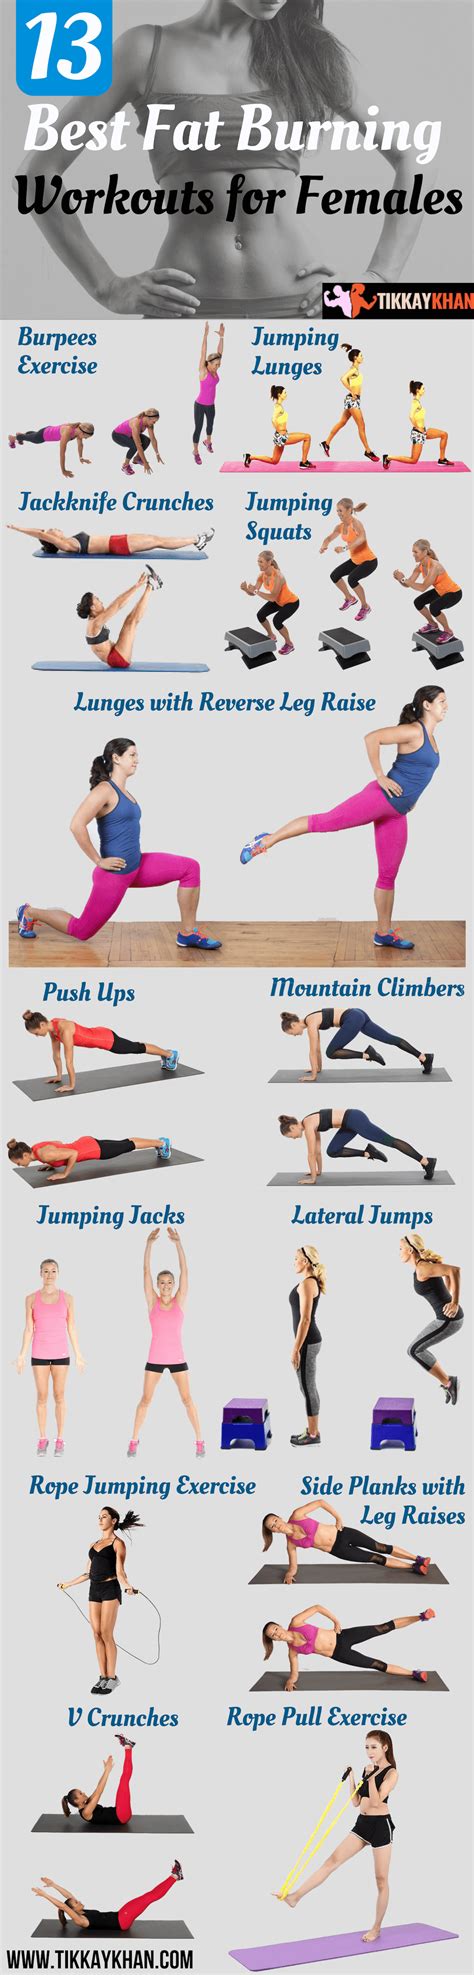 13 Best Fat Burning Workouts For Females Health And Fitness